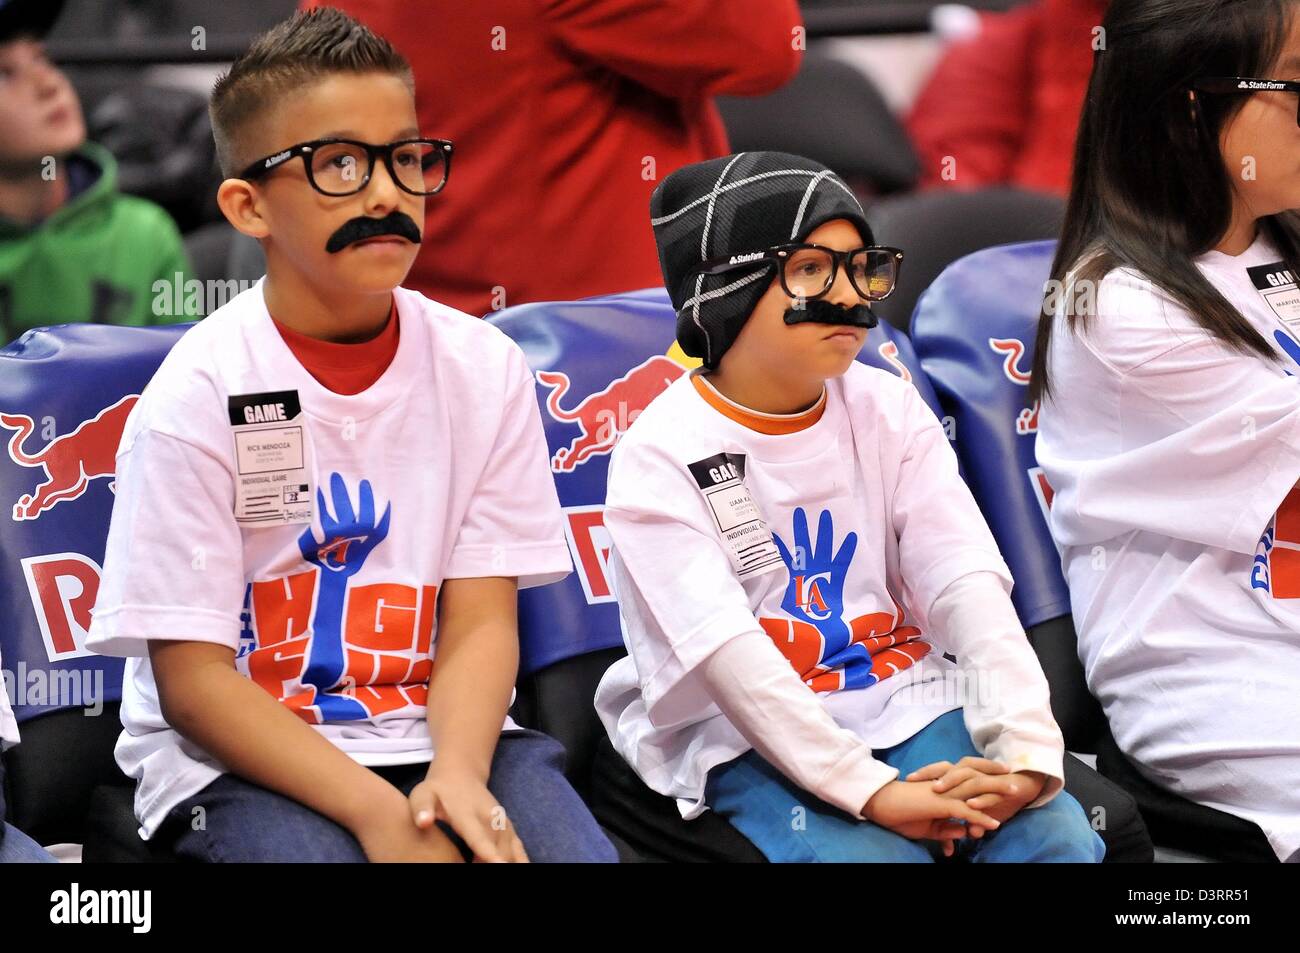 Los Angeles, CA., USA. 23rd Feb, 2013. Two young Clippers fans part of the High Five Kids Clippers club sport glasses and a mustache spoofing Chris Paul's Cliff Paul charecter during the NBA Basketball game between the Utah Jazz and the Los Angeles Clippers at Staples Center in Los Angeles, California. Josh Thompson/Cal Sport Media Stock Photo